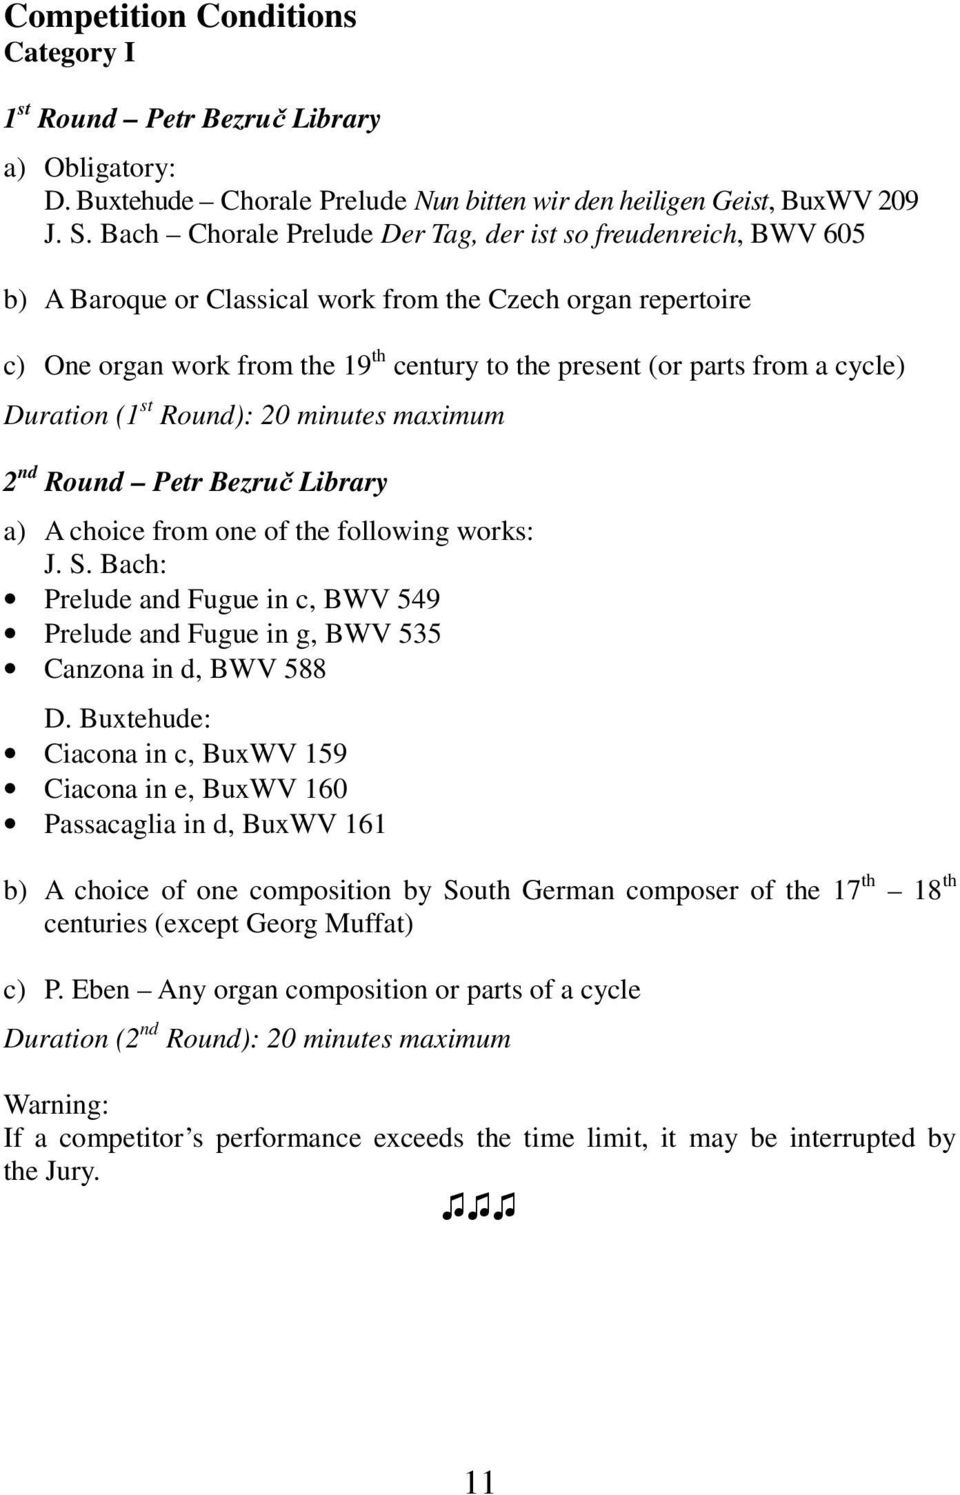 cycle) Duration (1 st Round): 20 minutes maximum 2 nd Round Petr Bezruč Library a) A choice from one of the following works: J. S.